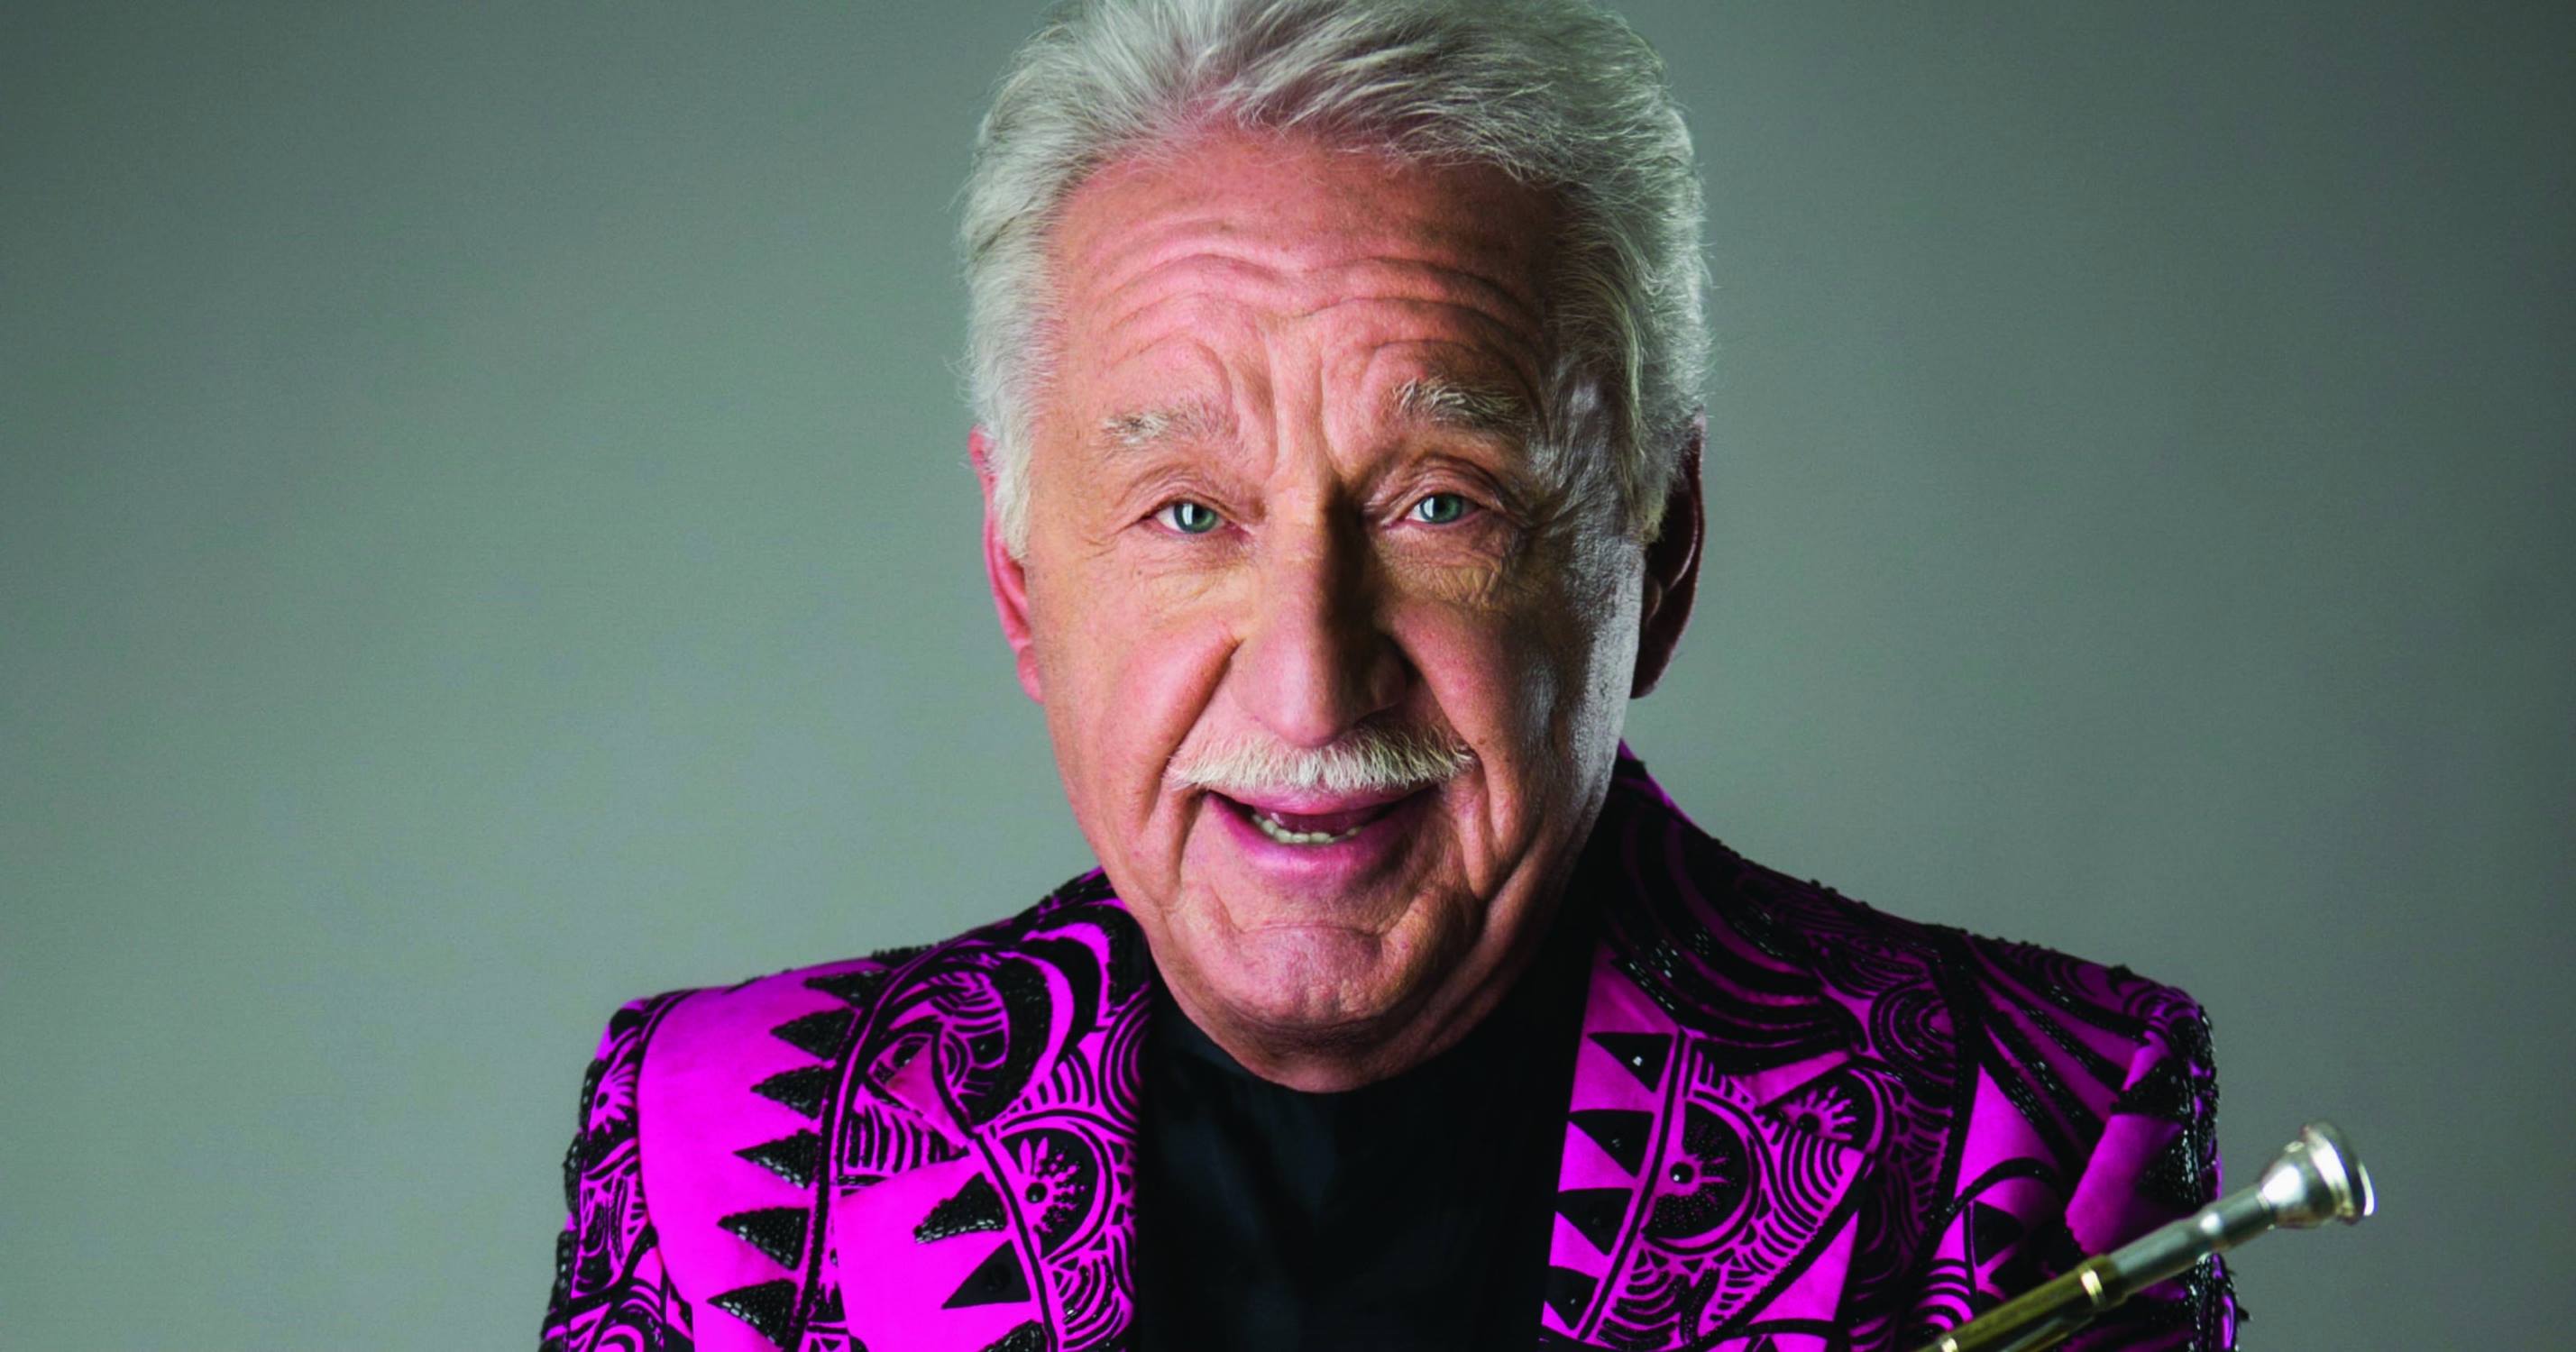 21-astounding-facts-about-doc-severinsen